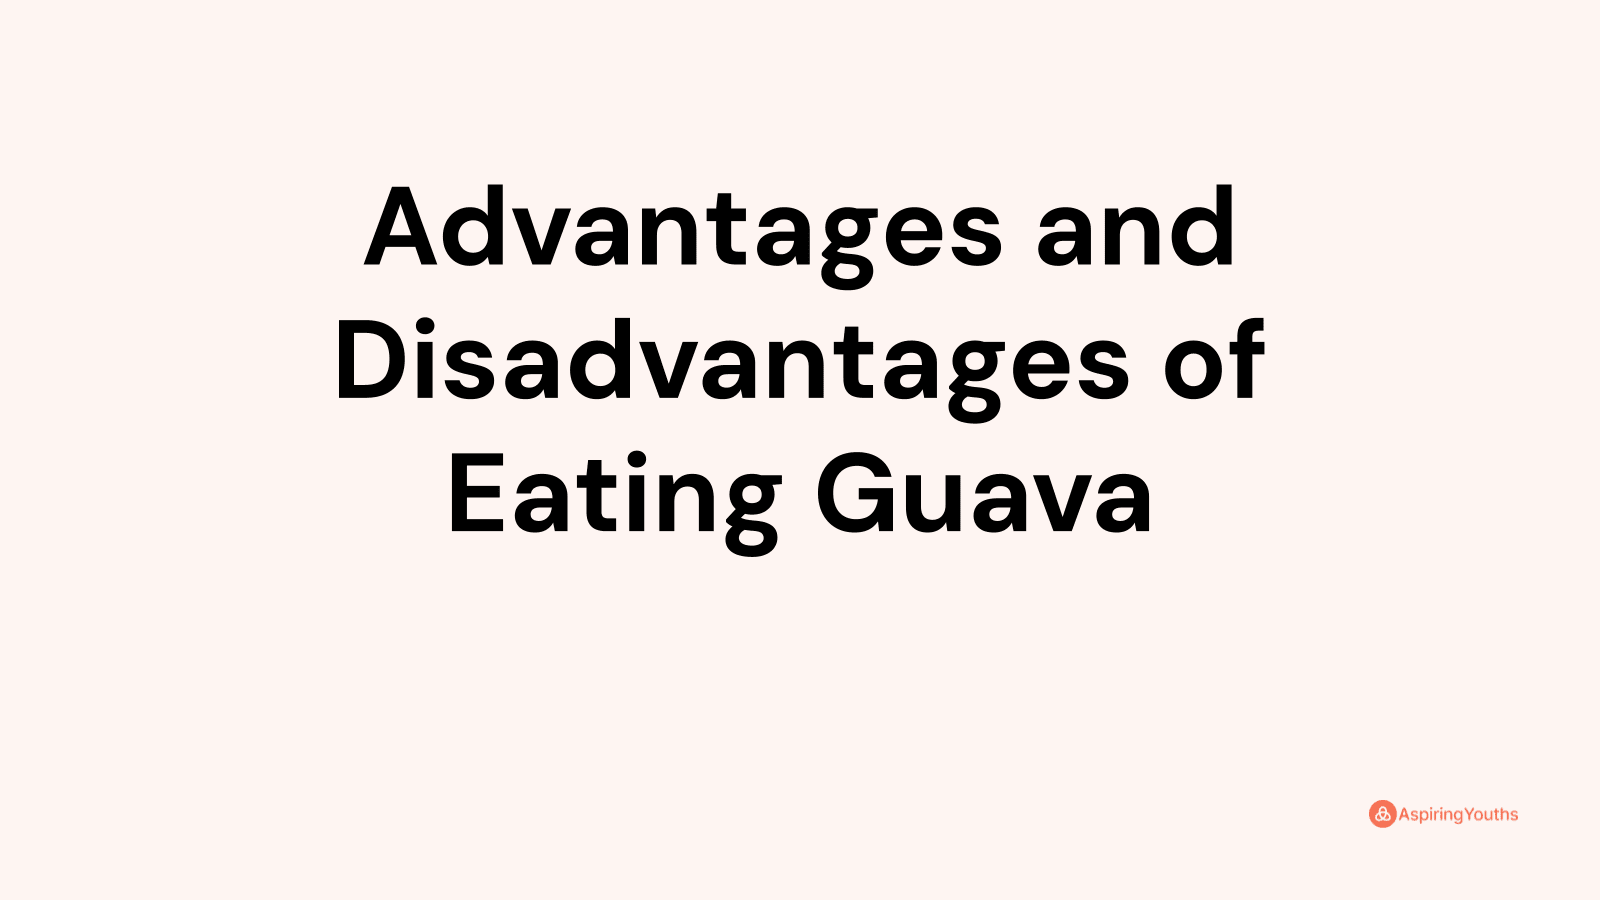 Advantages and disadvantages of Eating Guava